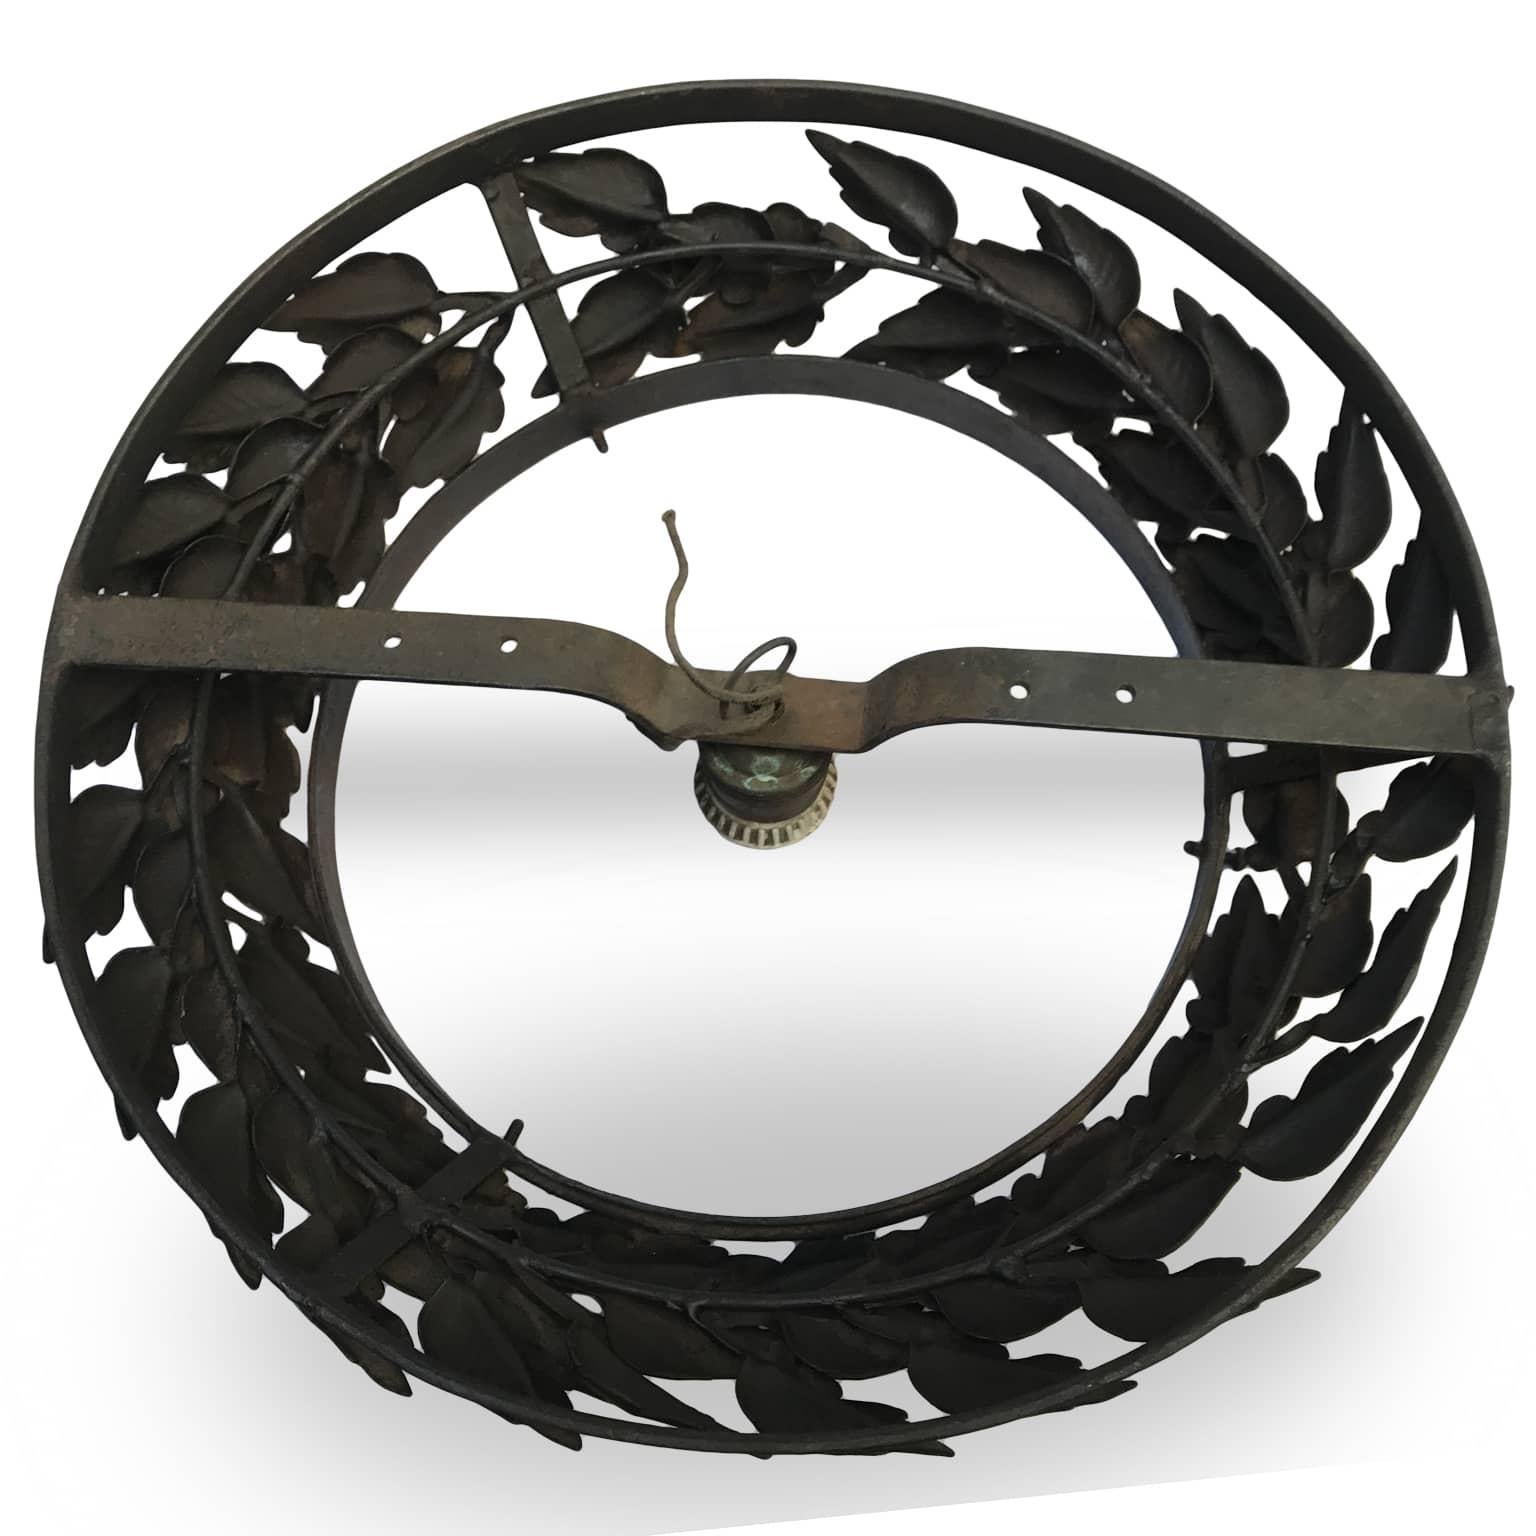 Hand-Crafted Spider Web Wrought Iron Ceiling Light 20th Century Italian Circular Sconce